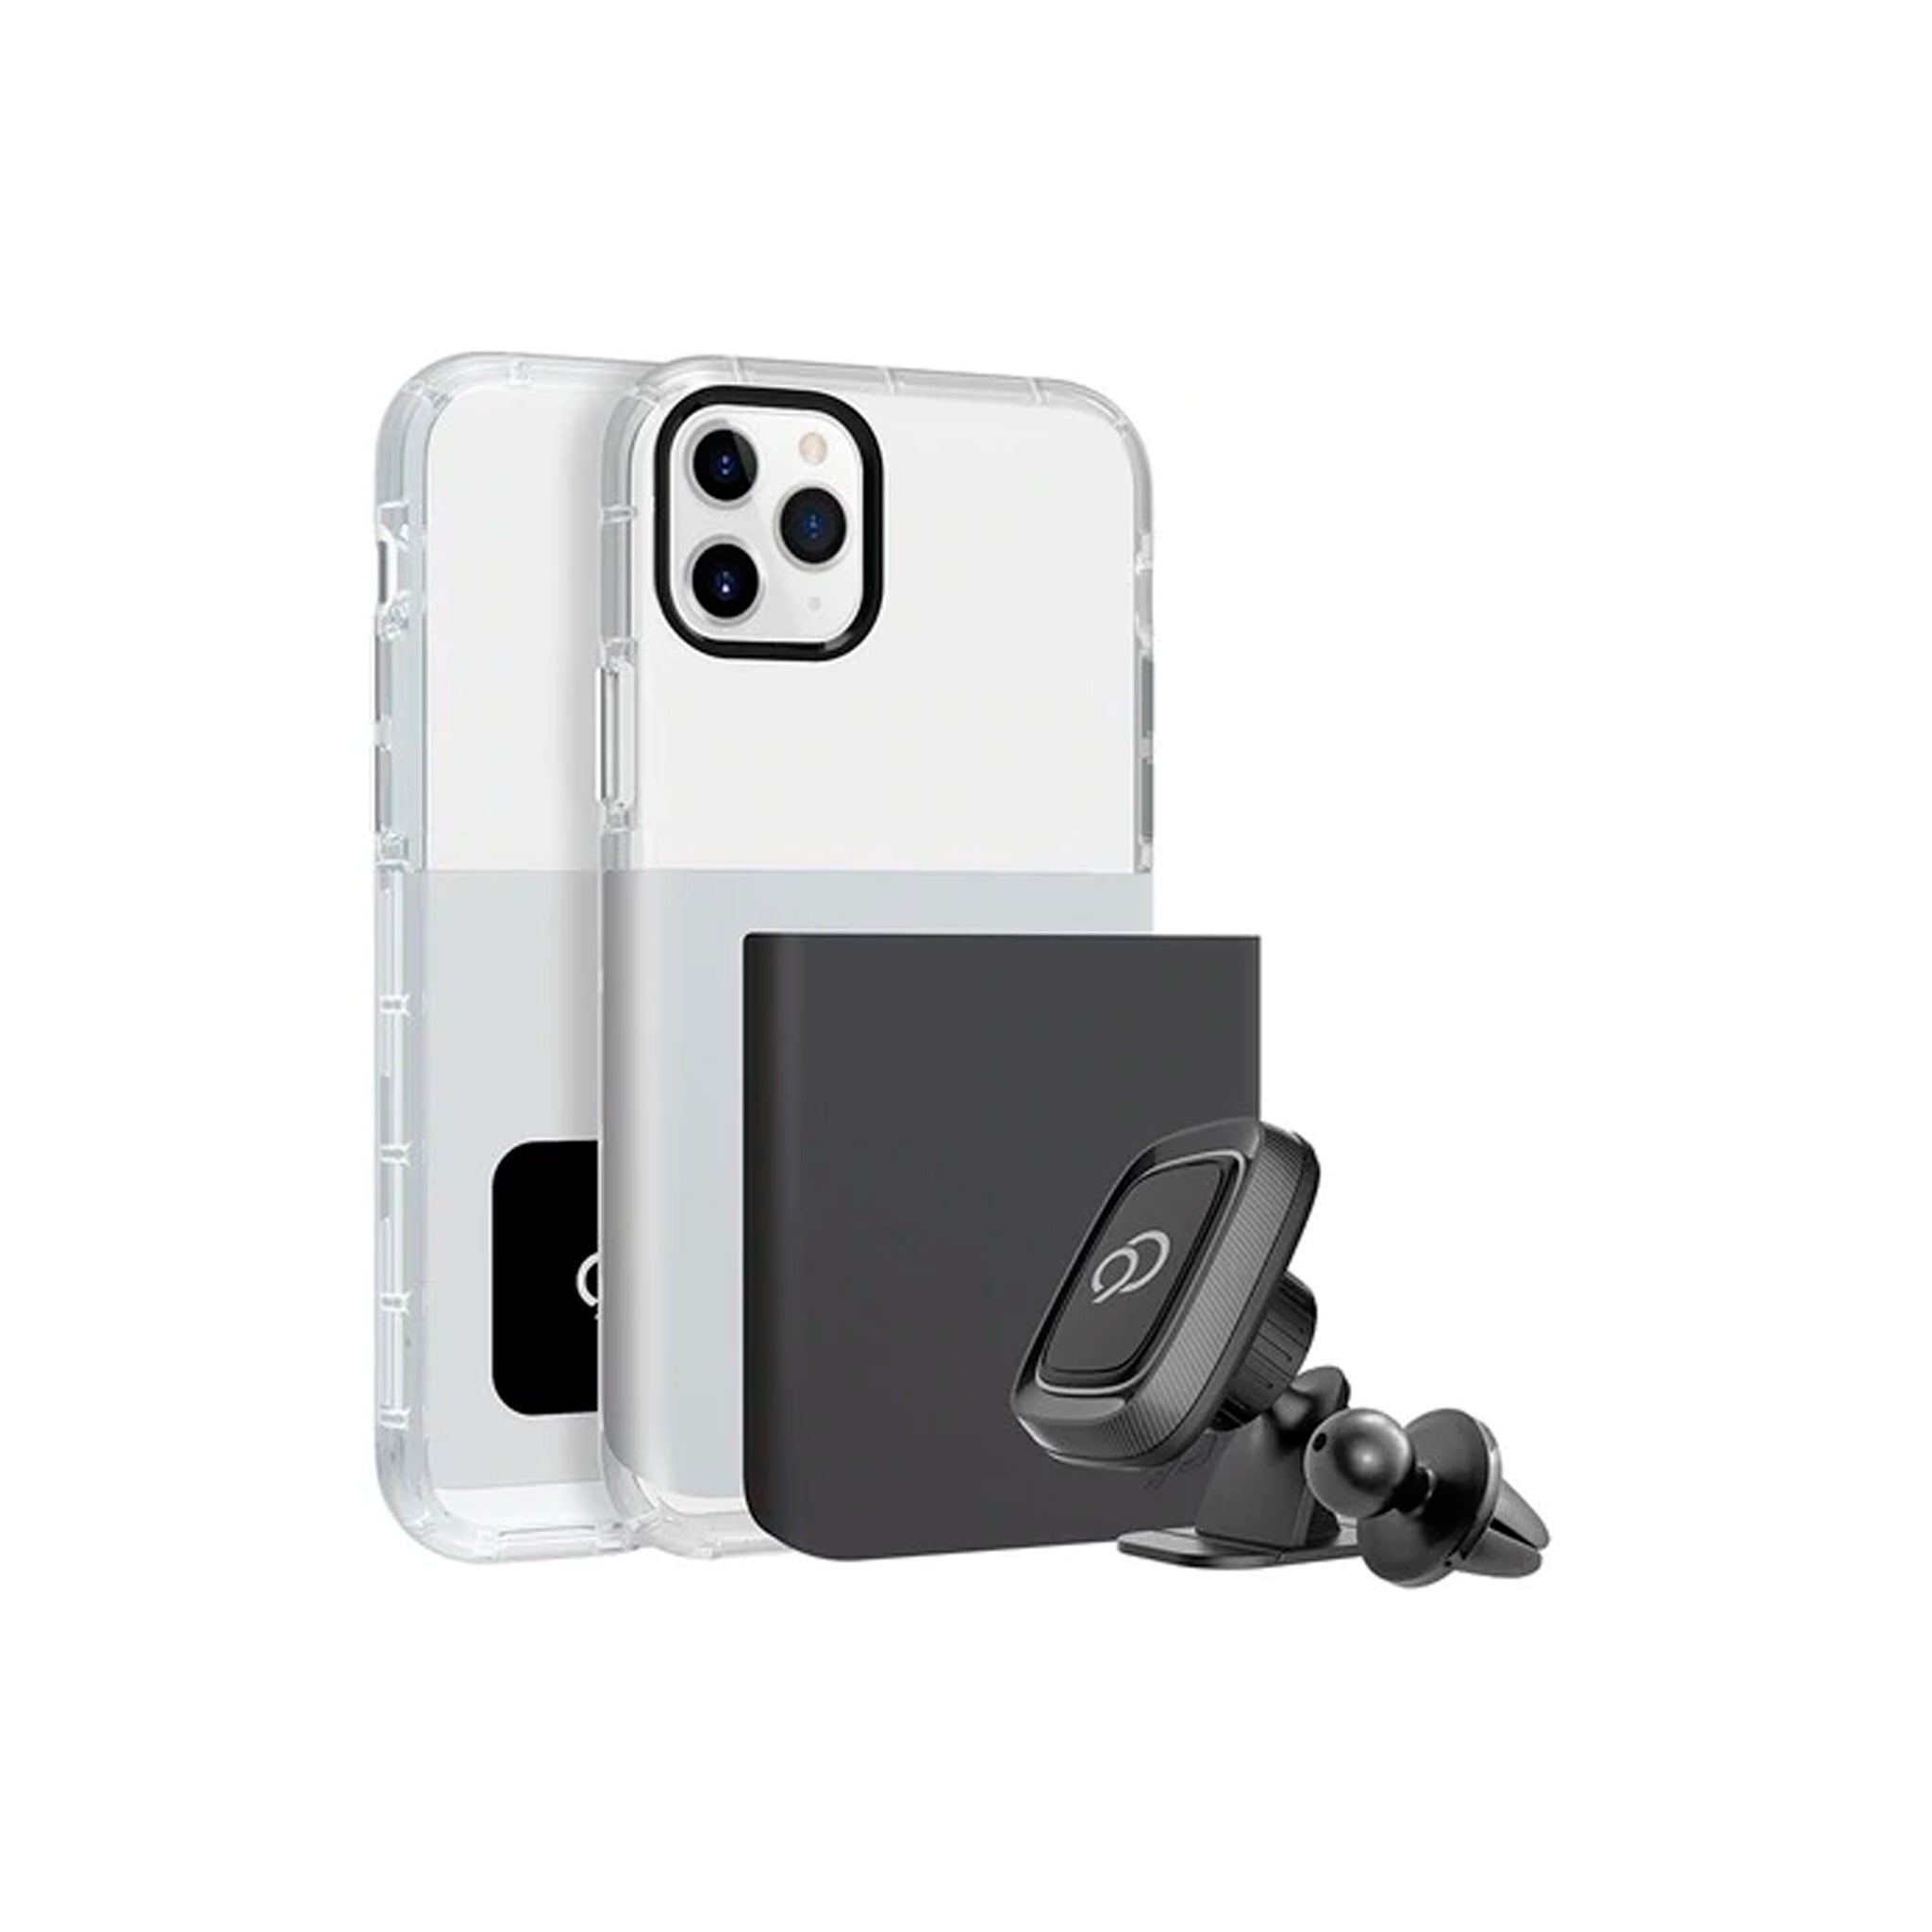 Nimbus9 - Ghost 2 Pro Case With Mount For Apple Iphone 11 Pro / Xs / X - Gunmetal Gray And Pure White